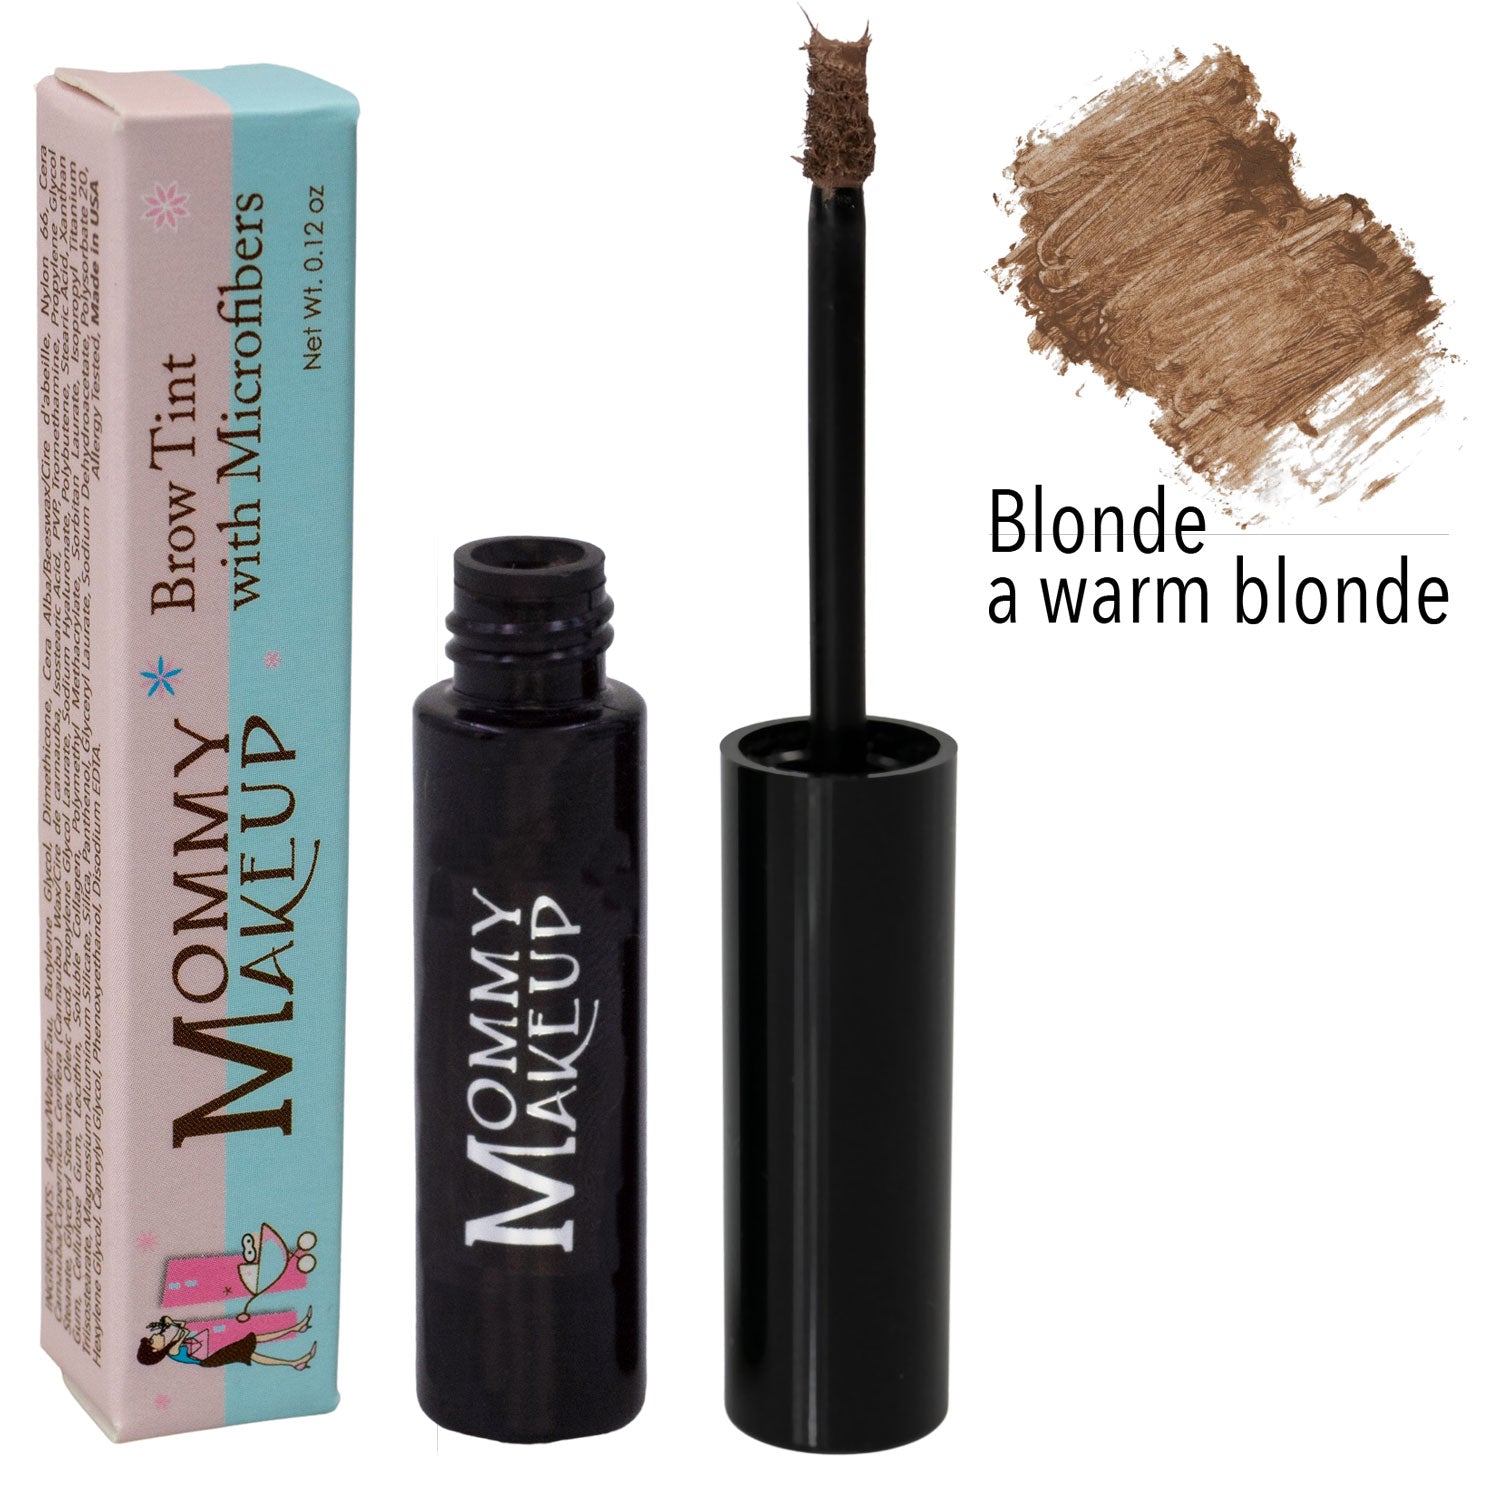 Brow Tint with Microfibers - Blonde by Mommy Makeup for a balanced and bright eye! Tinted Eyebrow Gel. Clump-free, paraben-free, talc free, allergy tested, PETA certified cruelty free. 